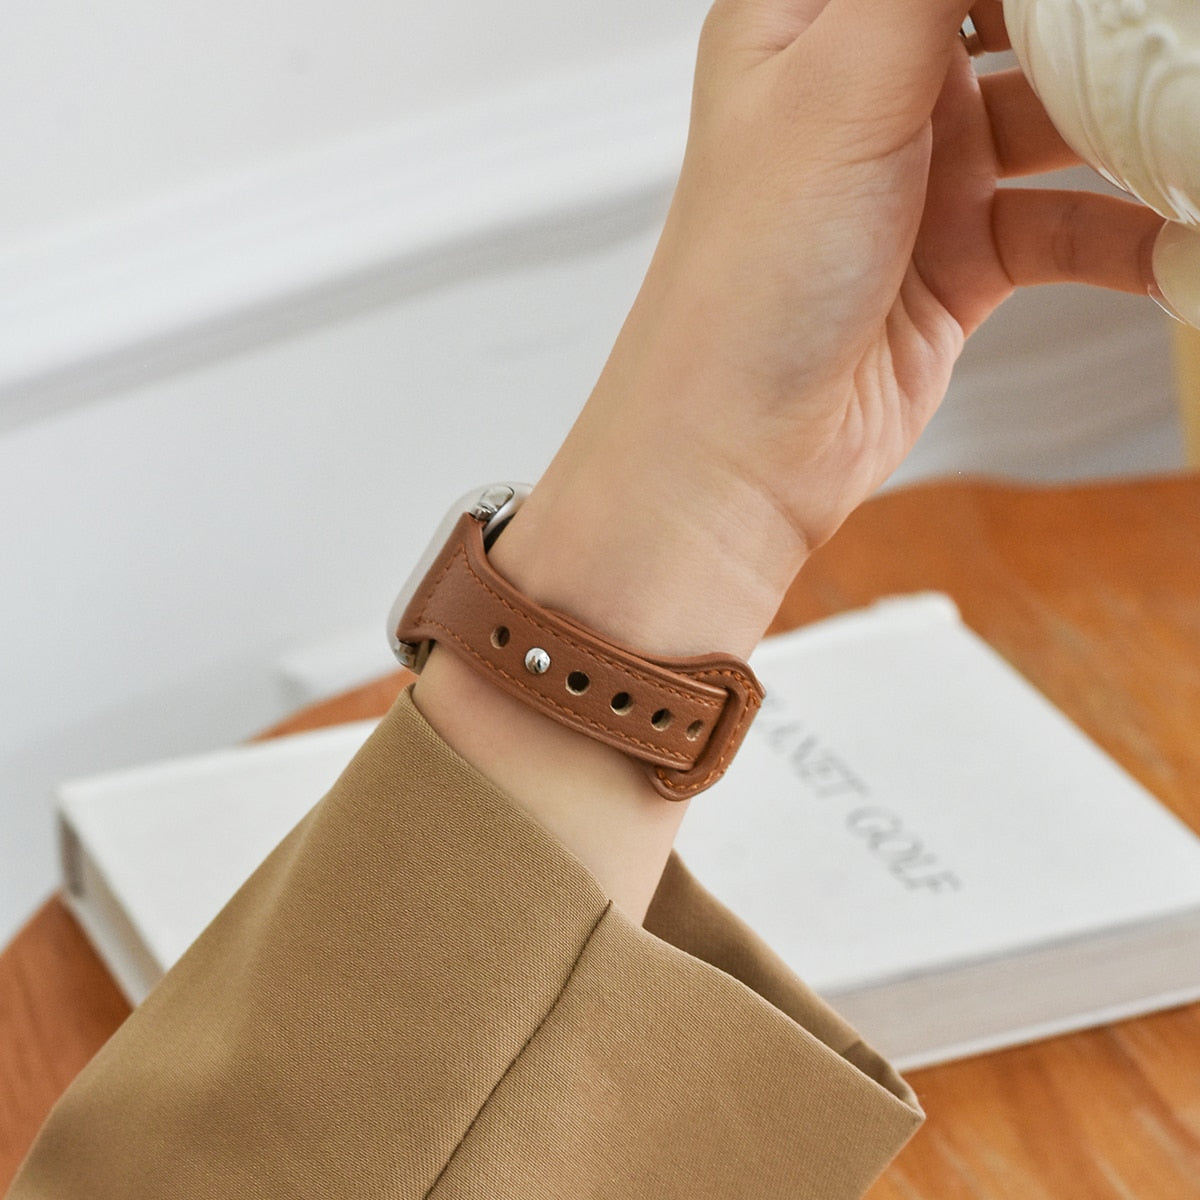 PU Leather Slim Strap For Apple Watch